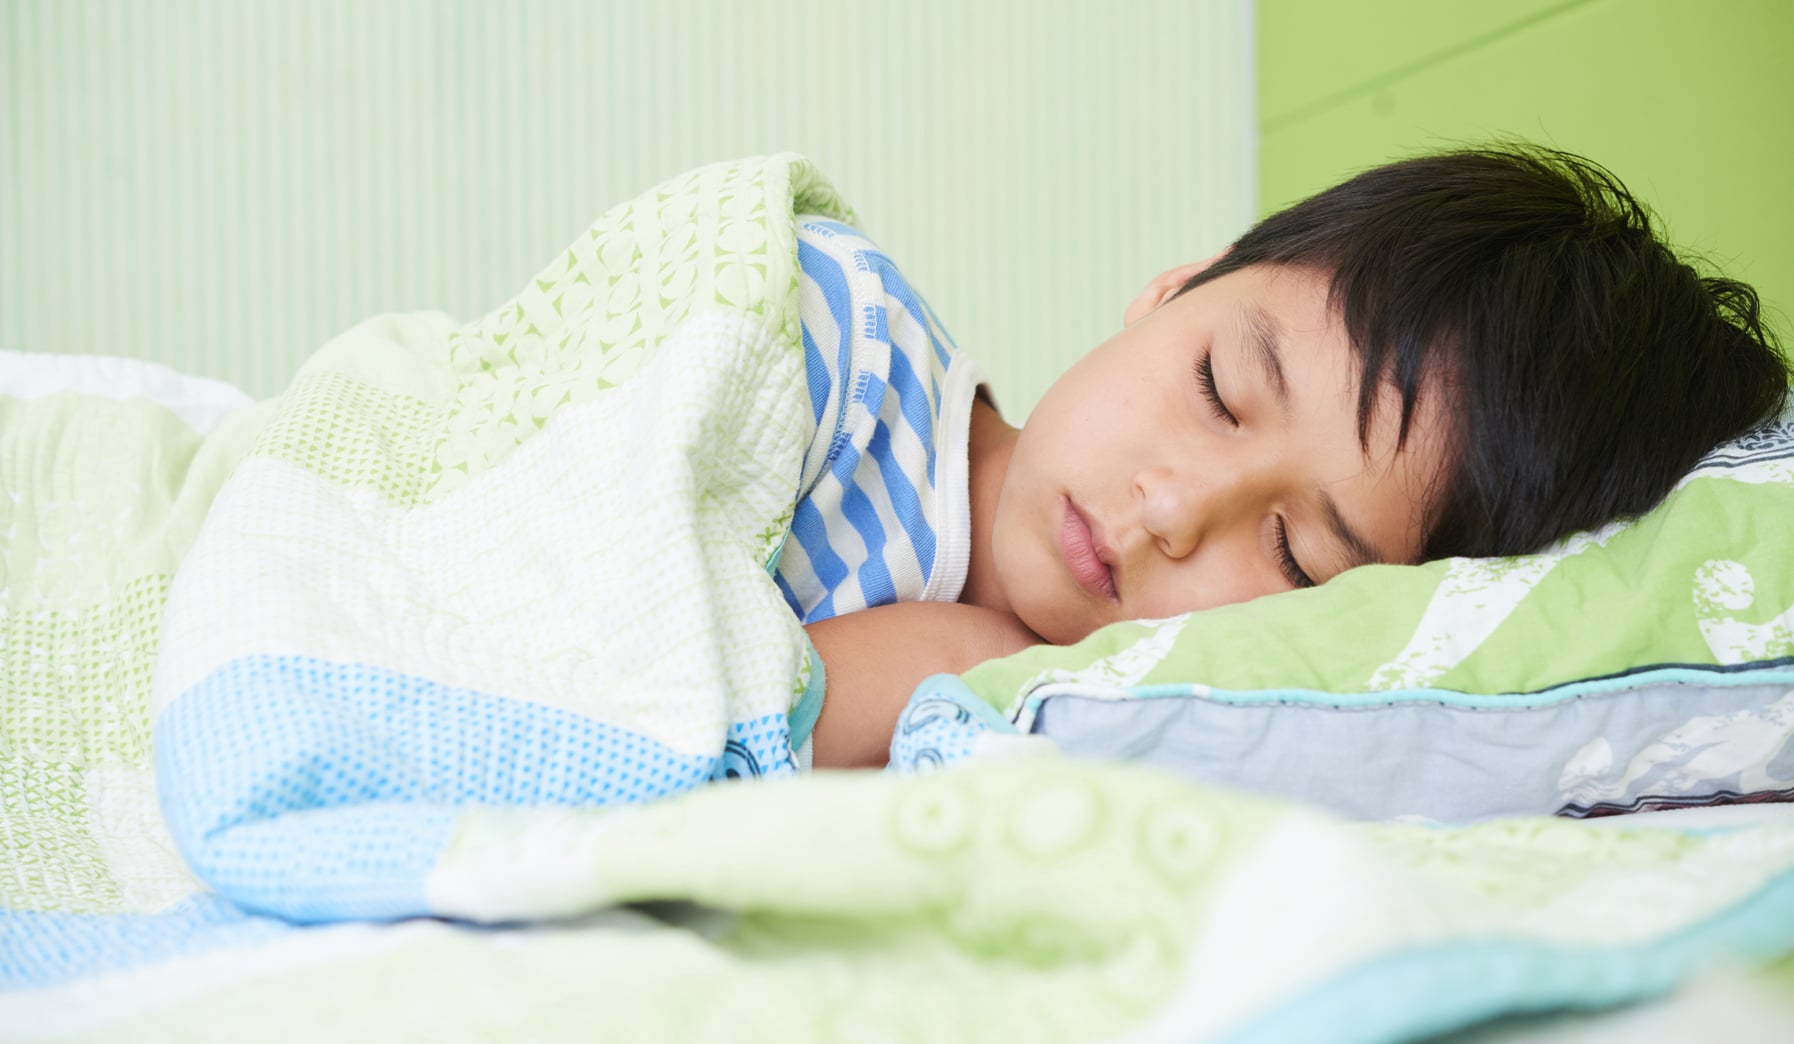 Learn how parents perceive their child’s overall sleep and why.